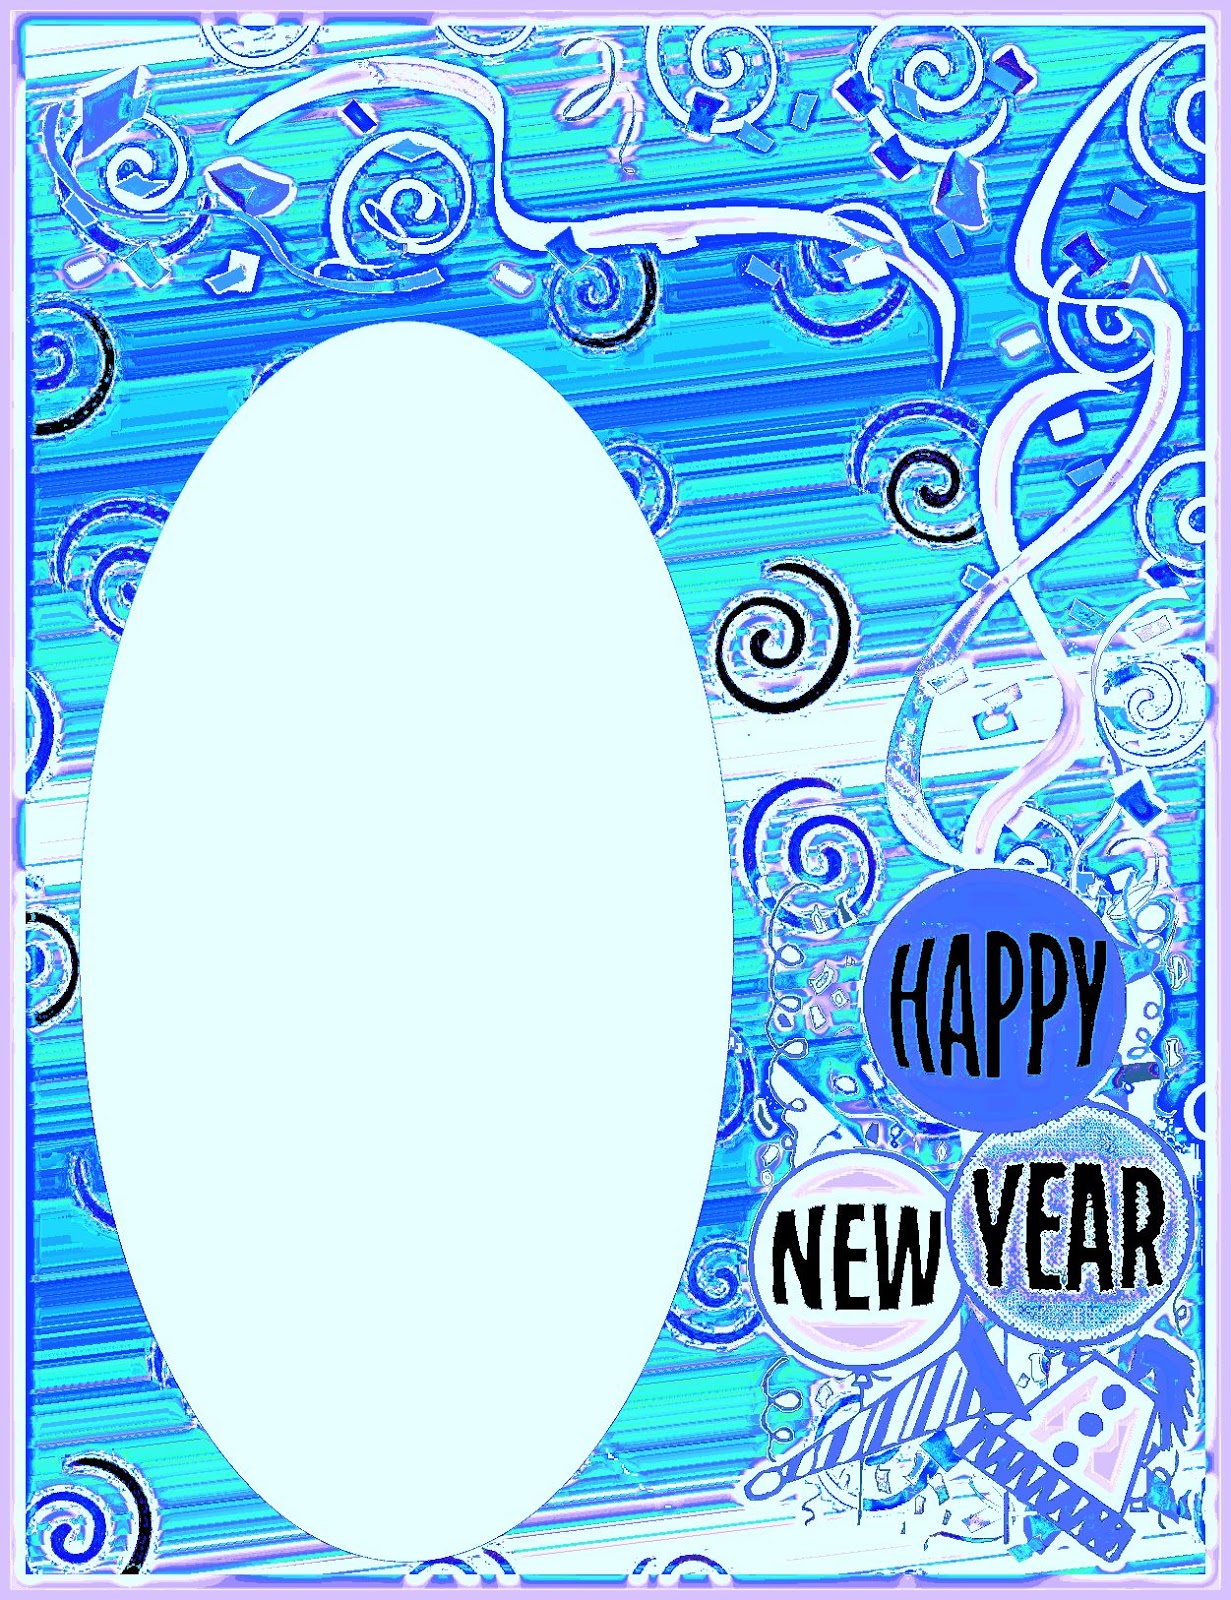 new year christian clipart - photo #30